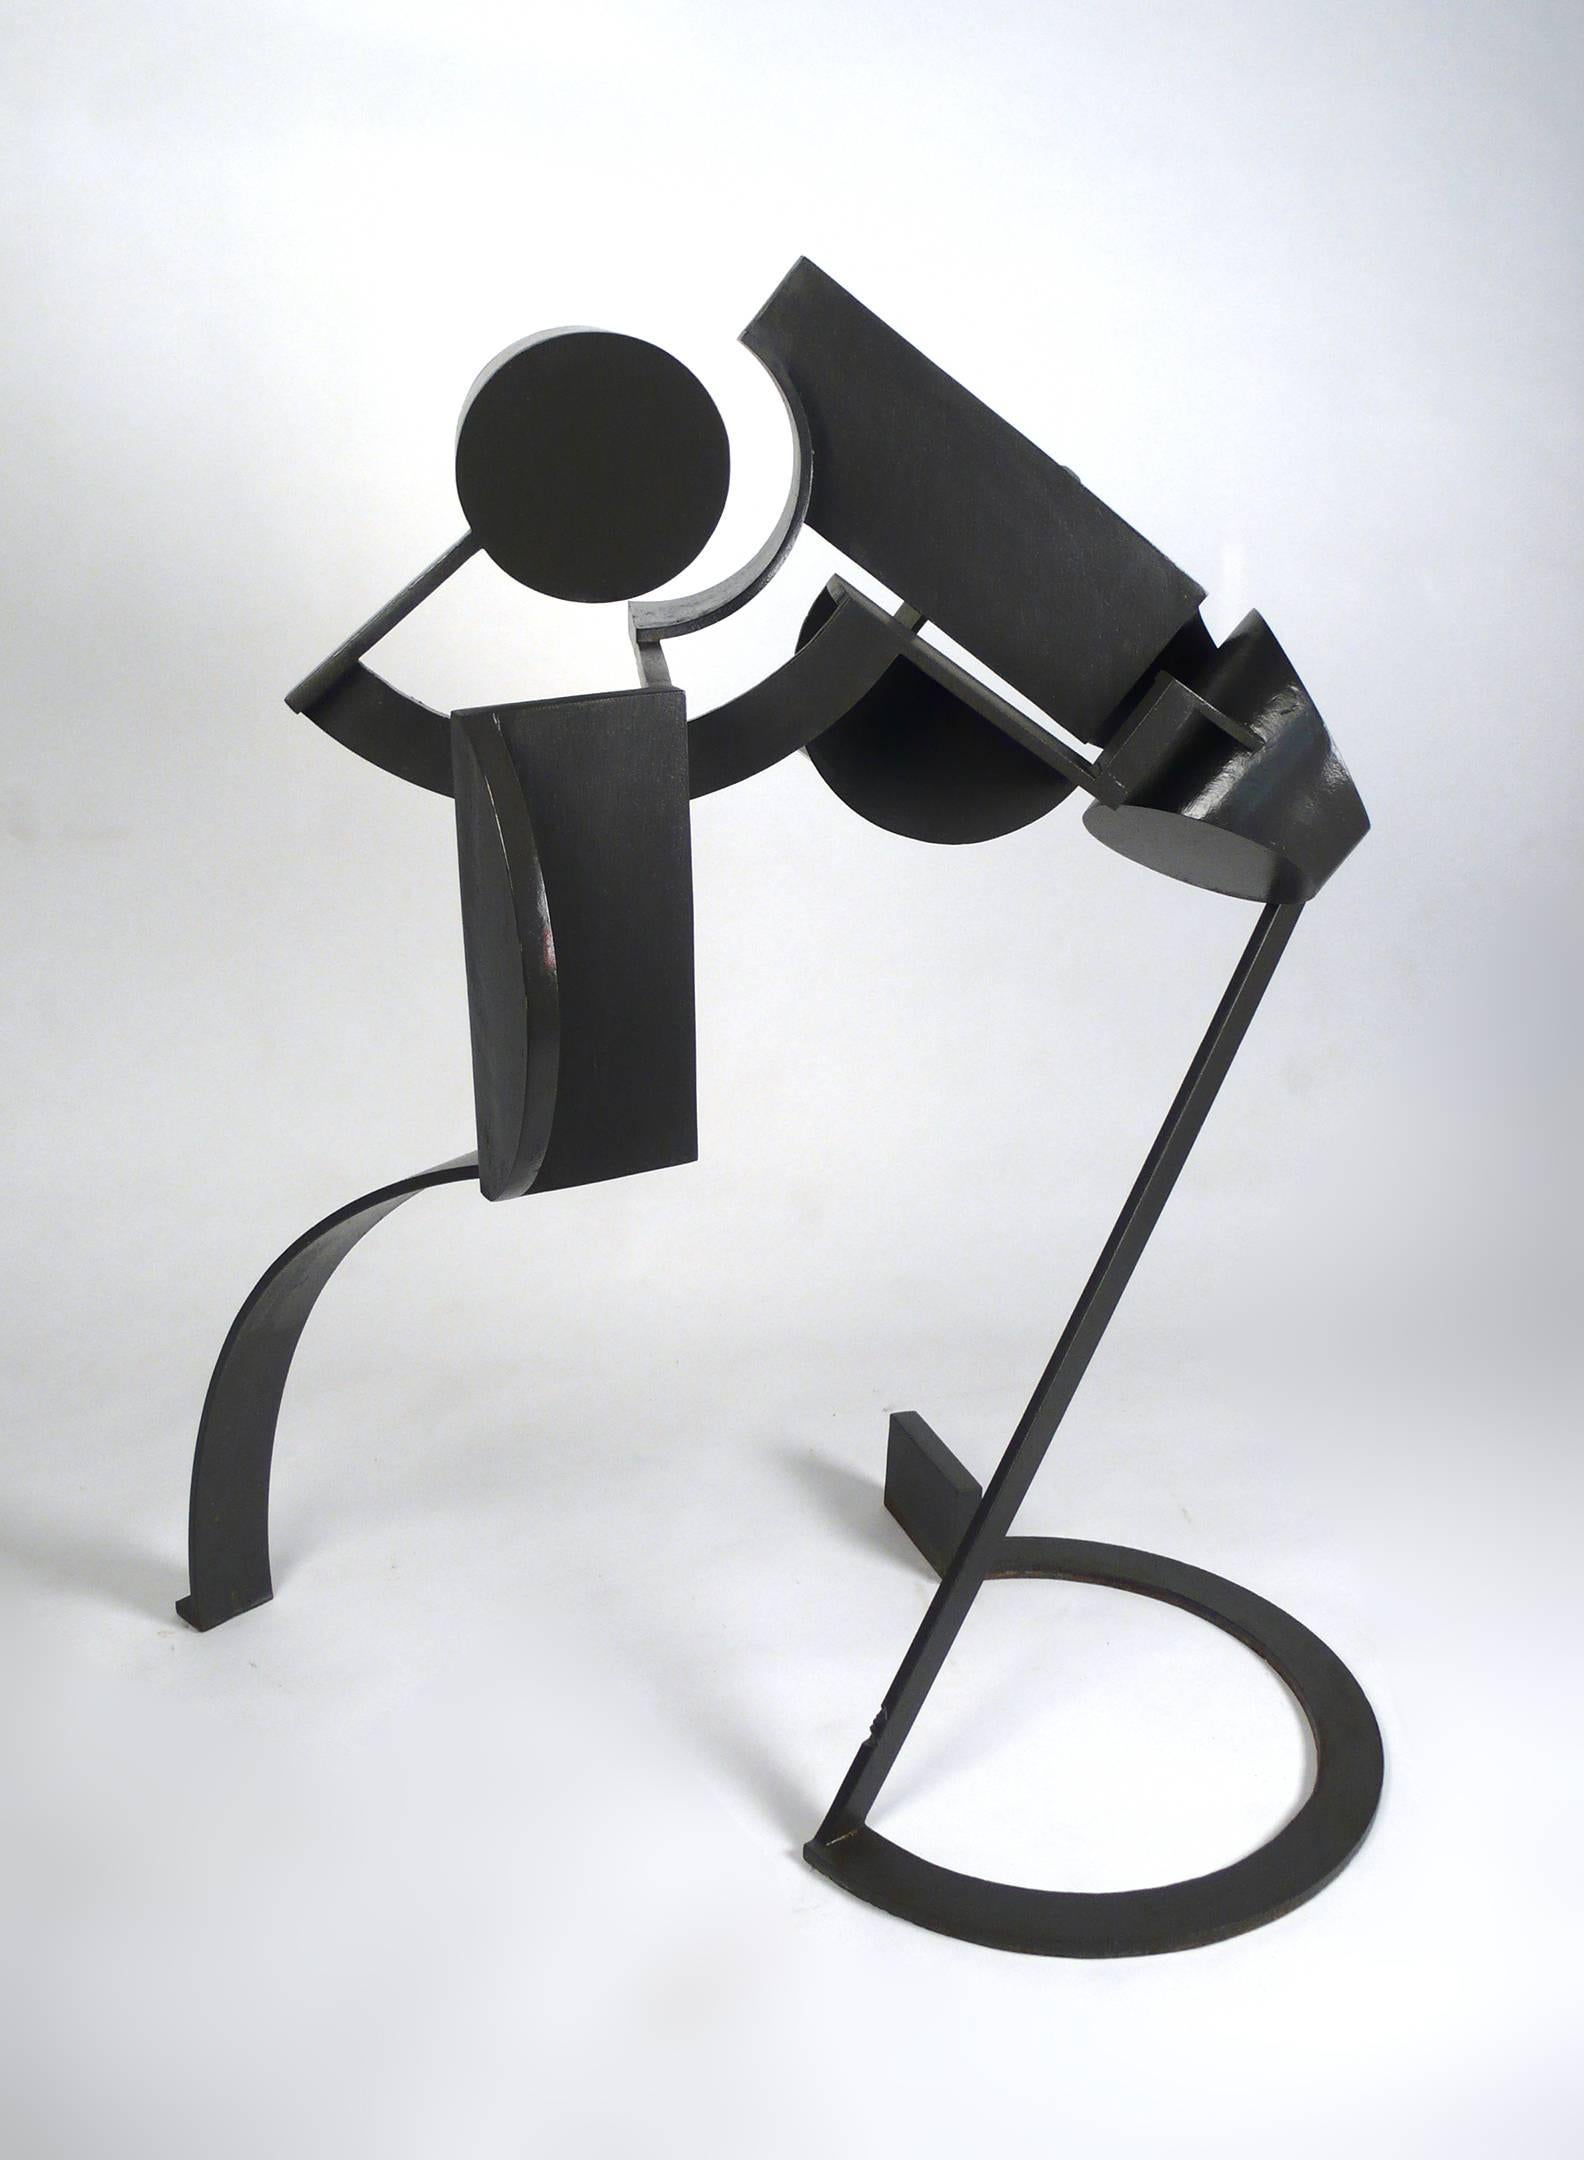 Abstract modernist steel sculpture produced by Texas artist Marshall Cunningham. This sculpture was a private commission for the Norman V. Kinsey family of Shreveport LA. It is about 30 years old and retains its original finish. The two large